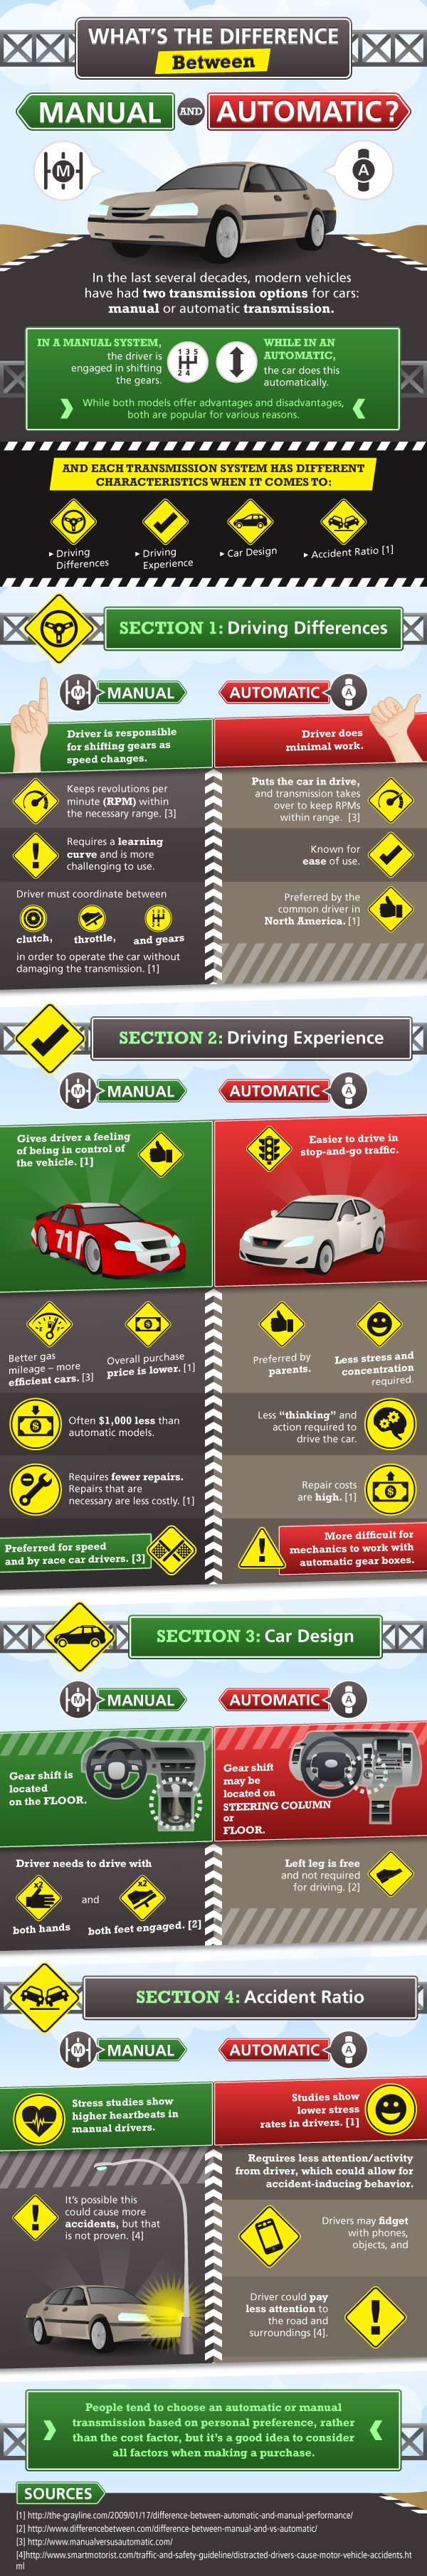 difference between manual and automatic